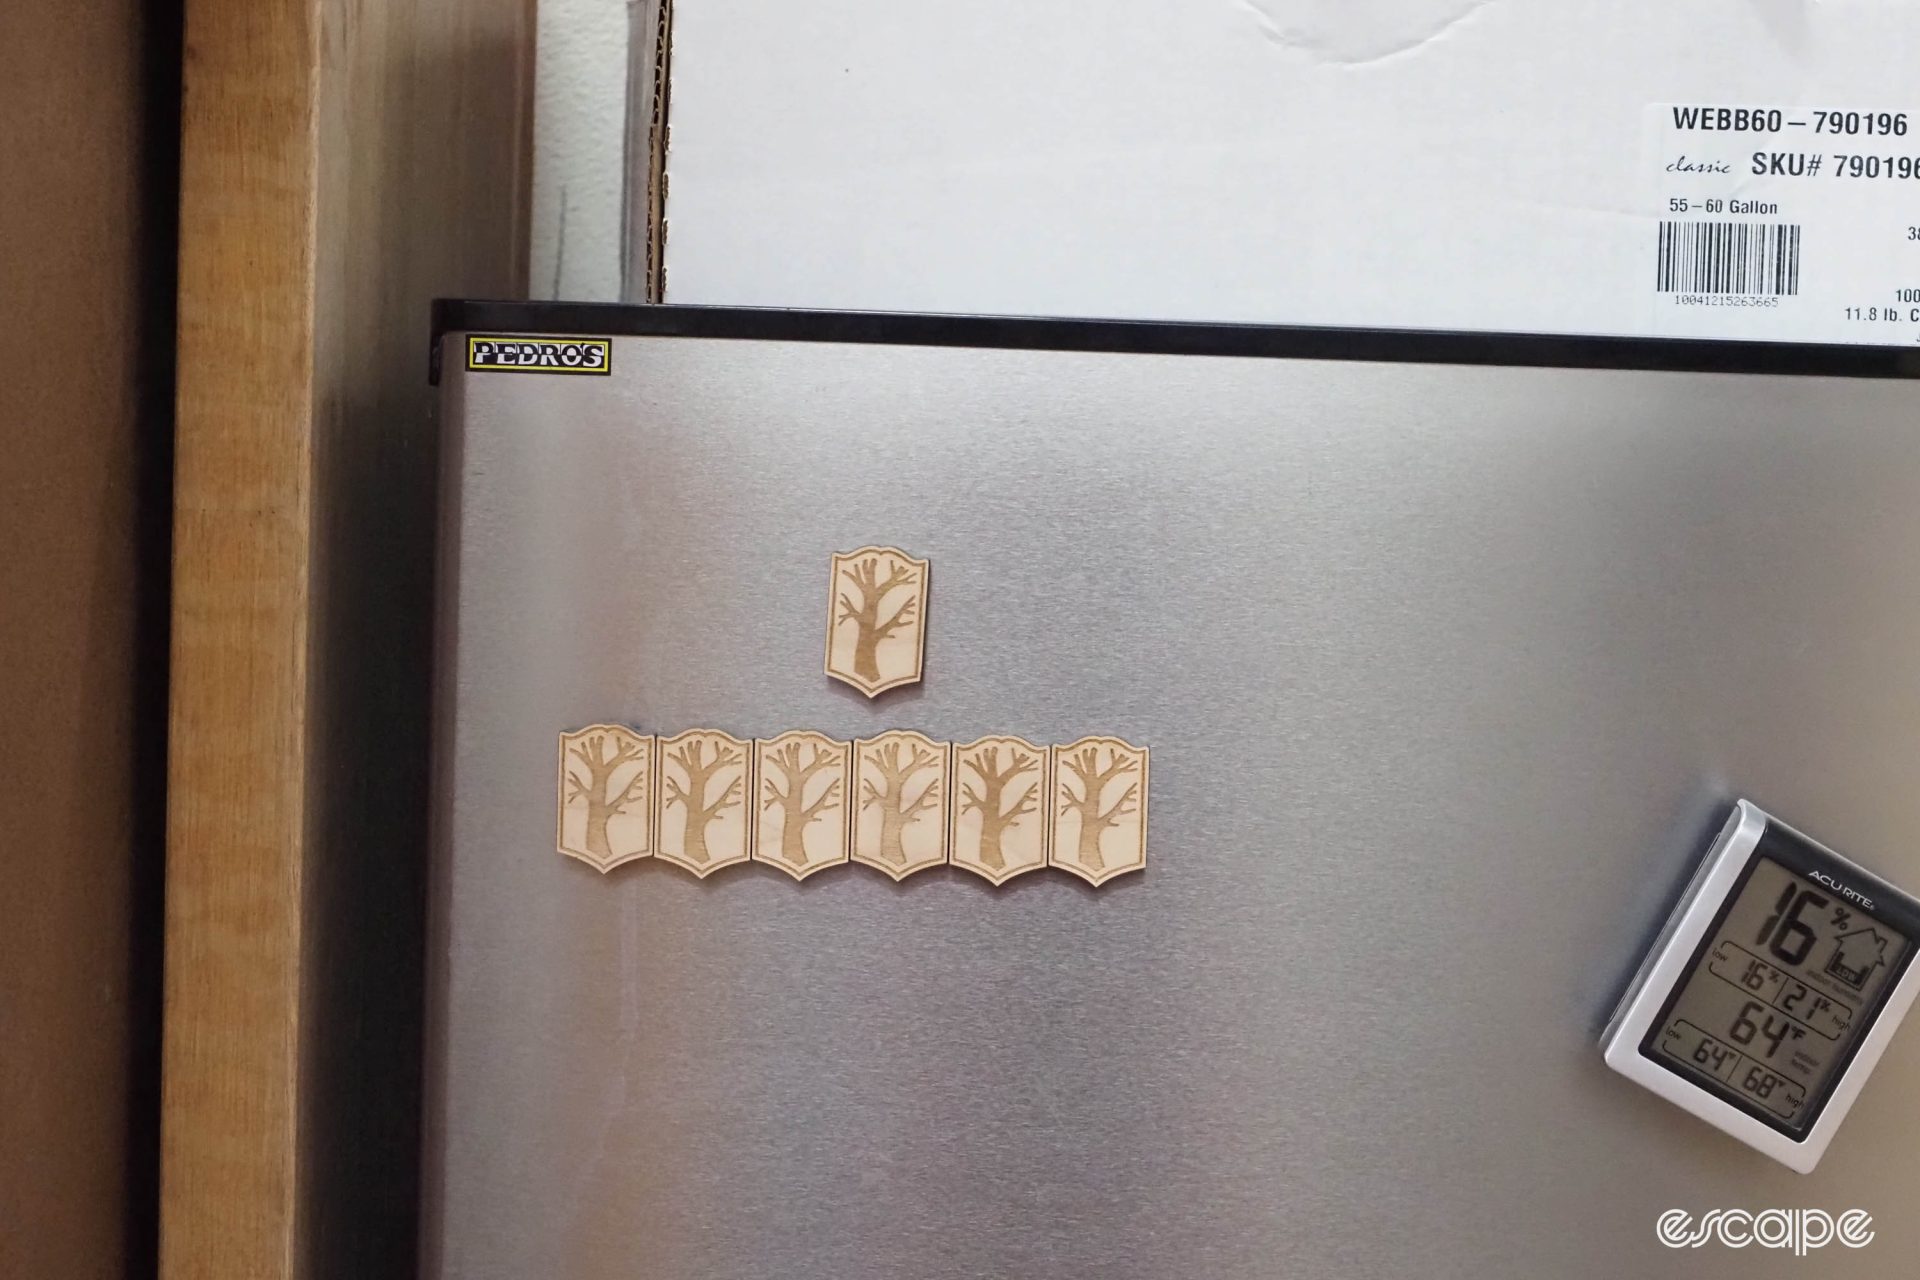 Magnets with the Mosaic logo are attached to a fridge. The logo is a tree trunk with multiple branches.